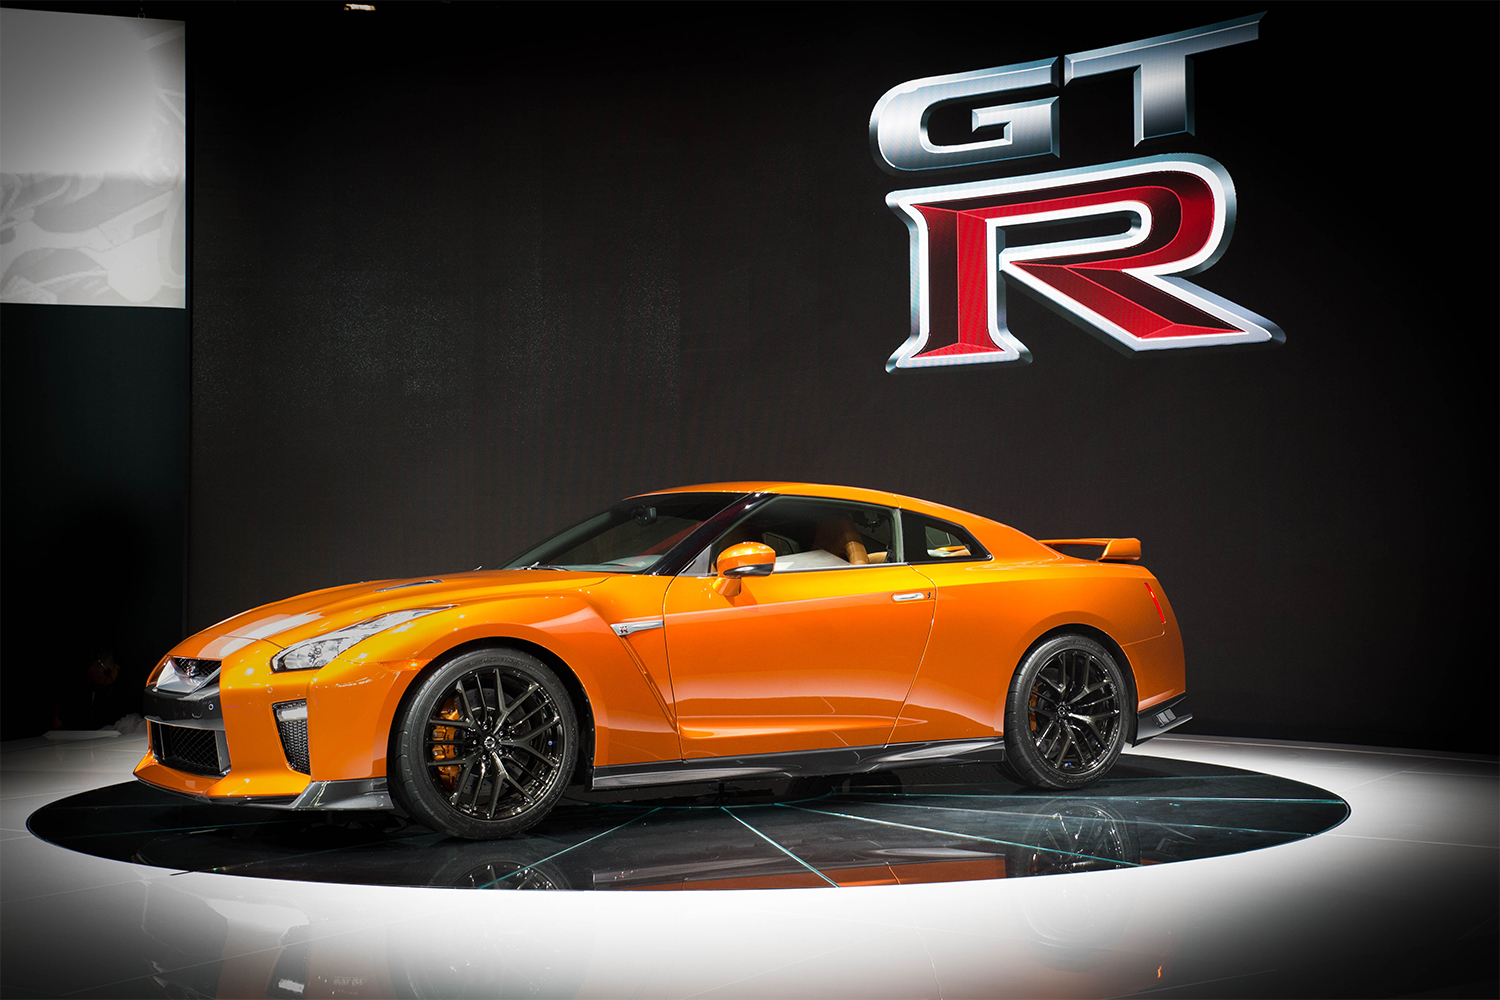 The 2017 Nissan GT-R R35 in orange on stage at the 2016 New York International Auto Show